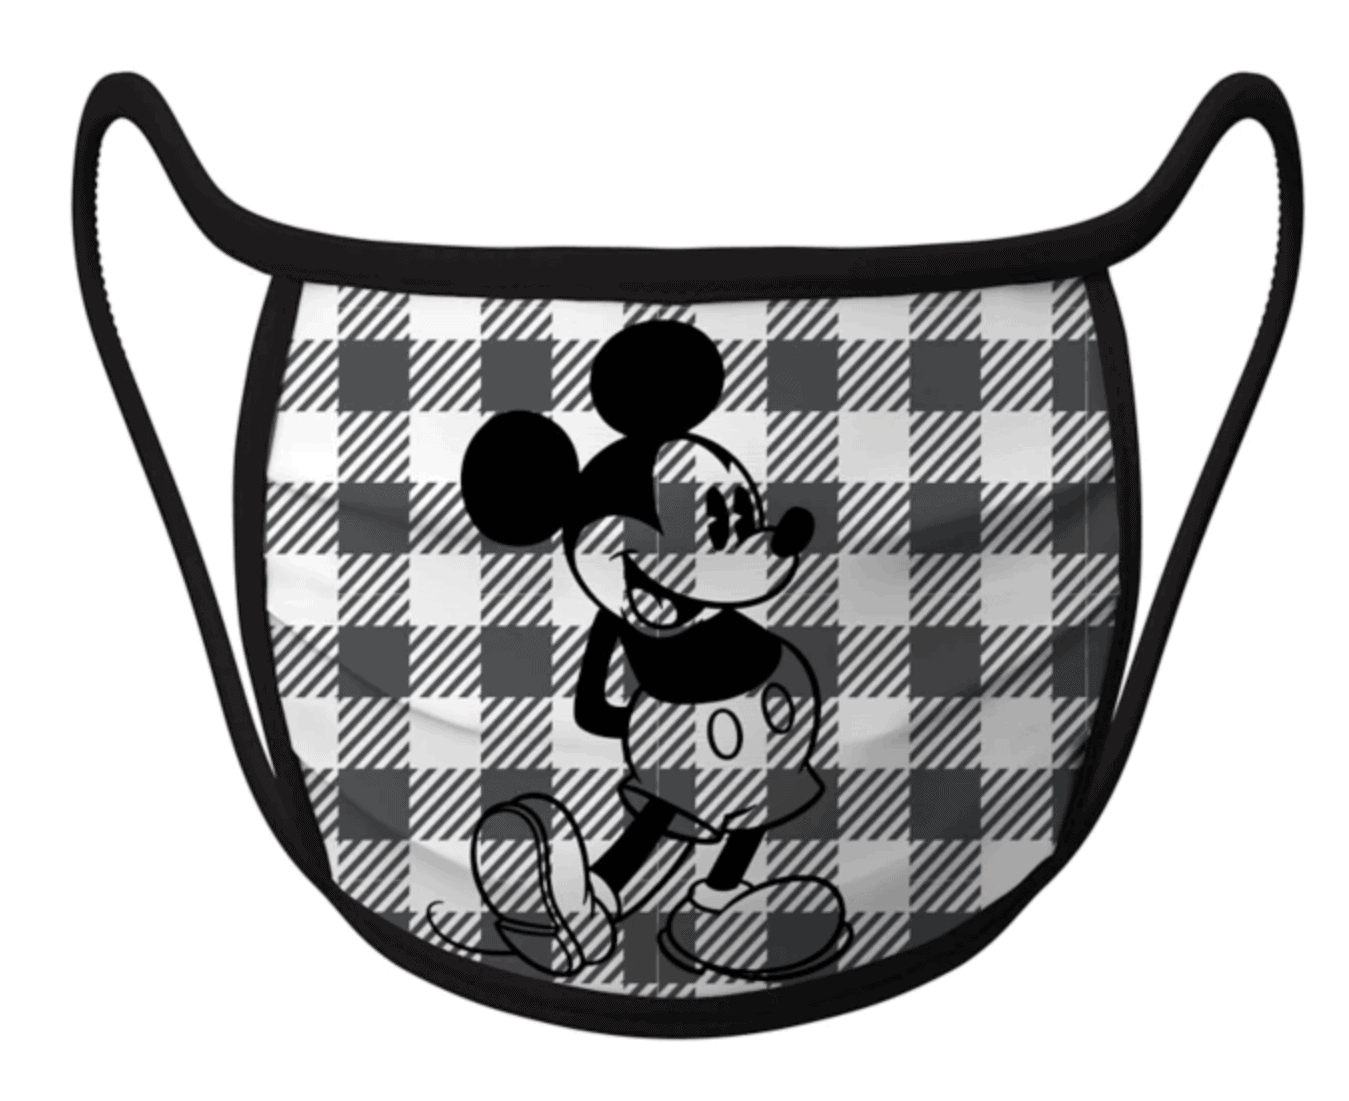 Mickey Mouse 1